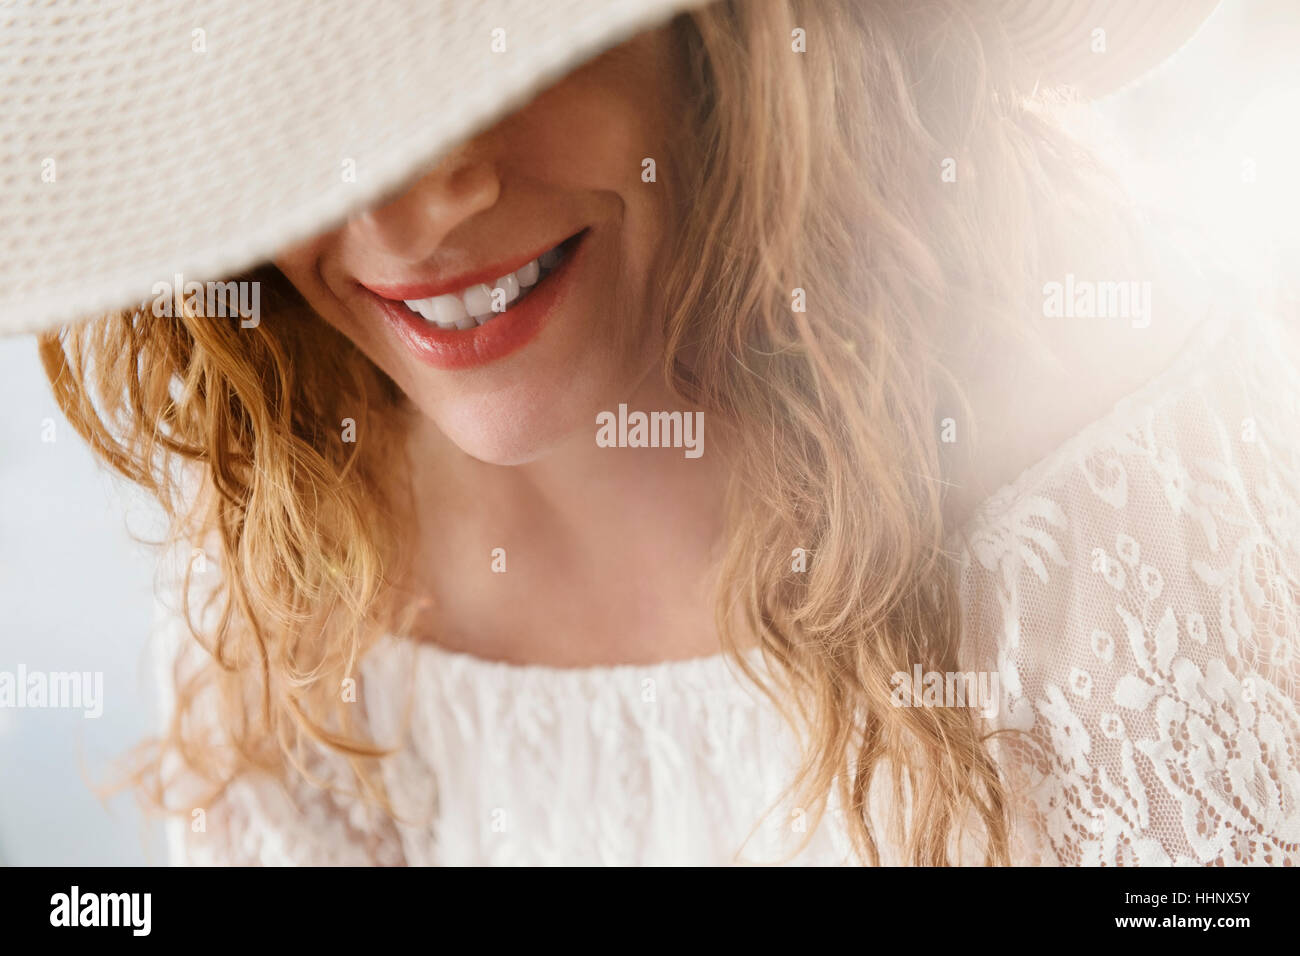 Sun hat covering face of Caucasian woman Stock Photo